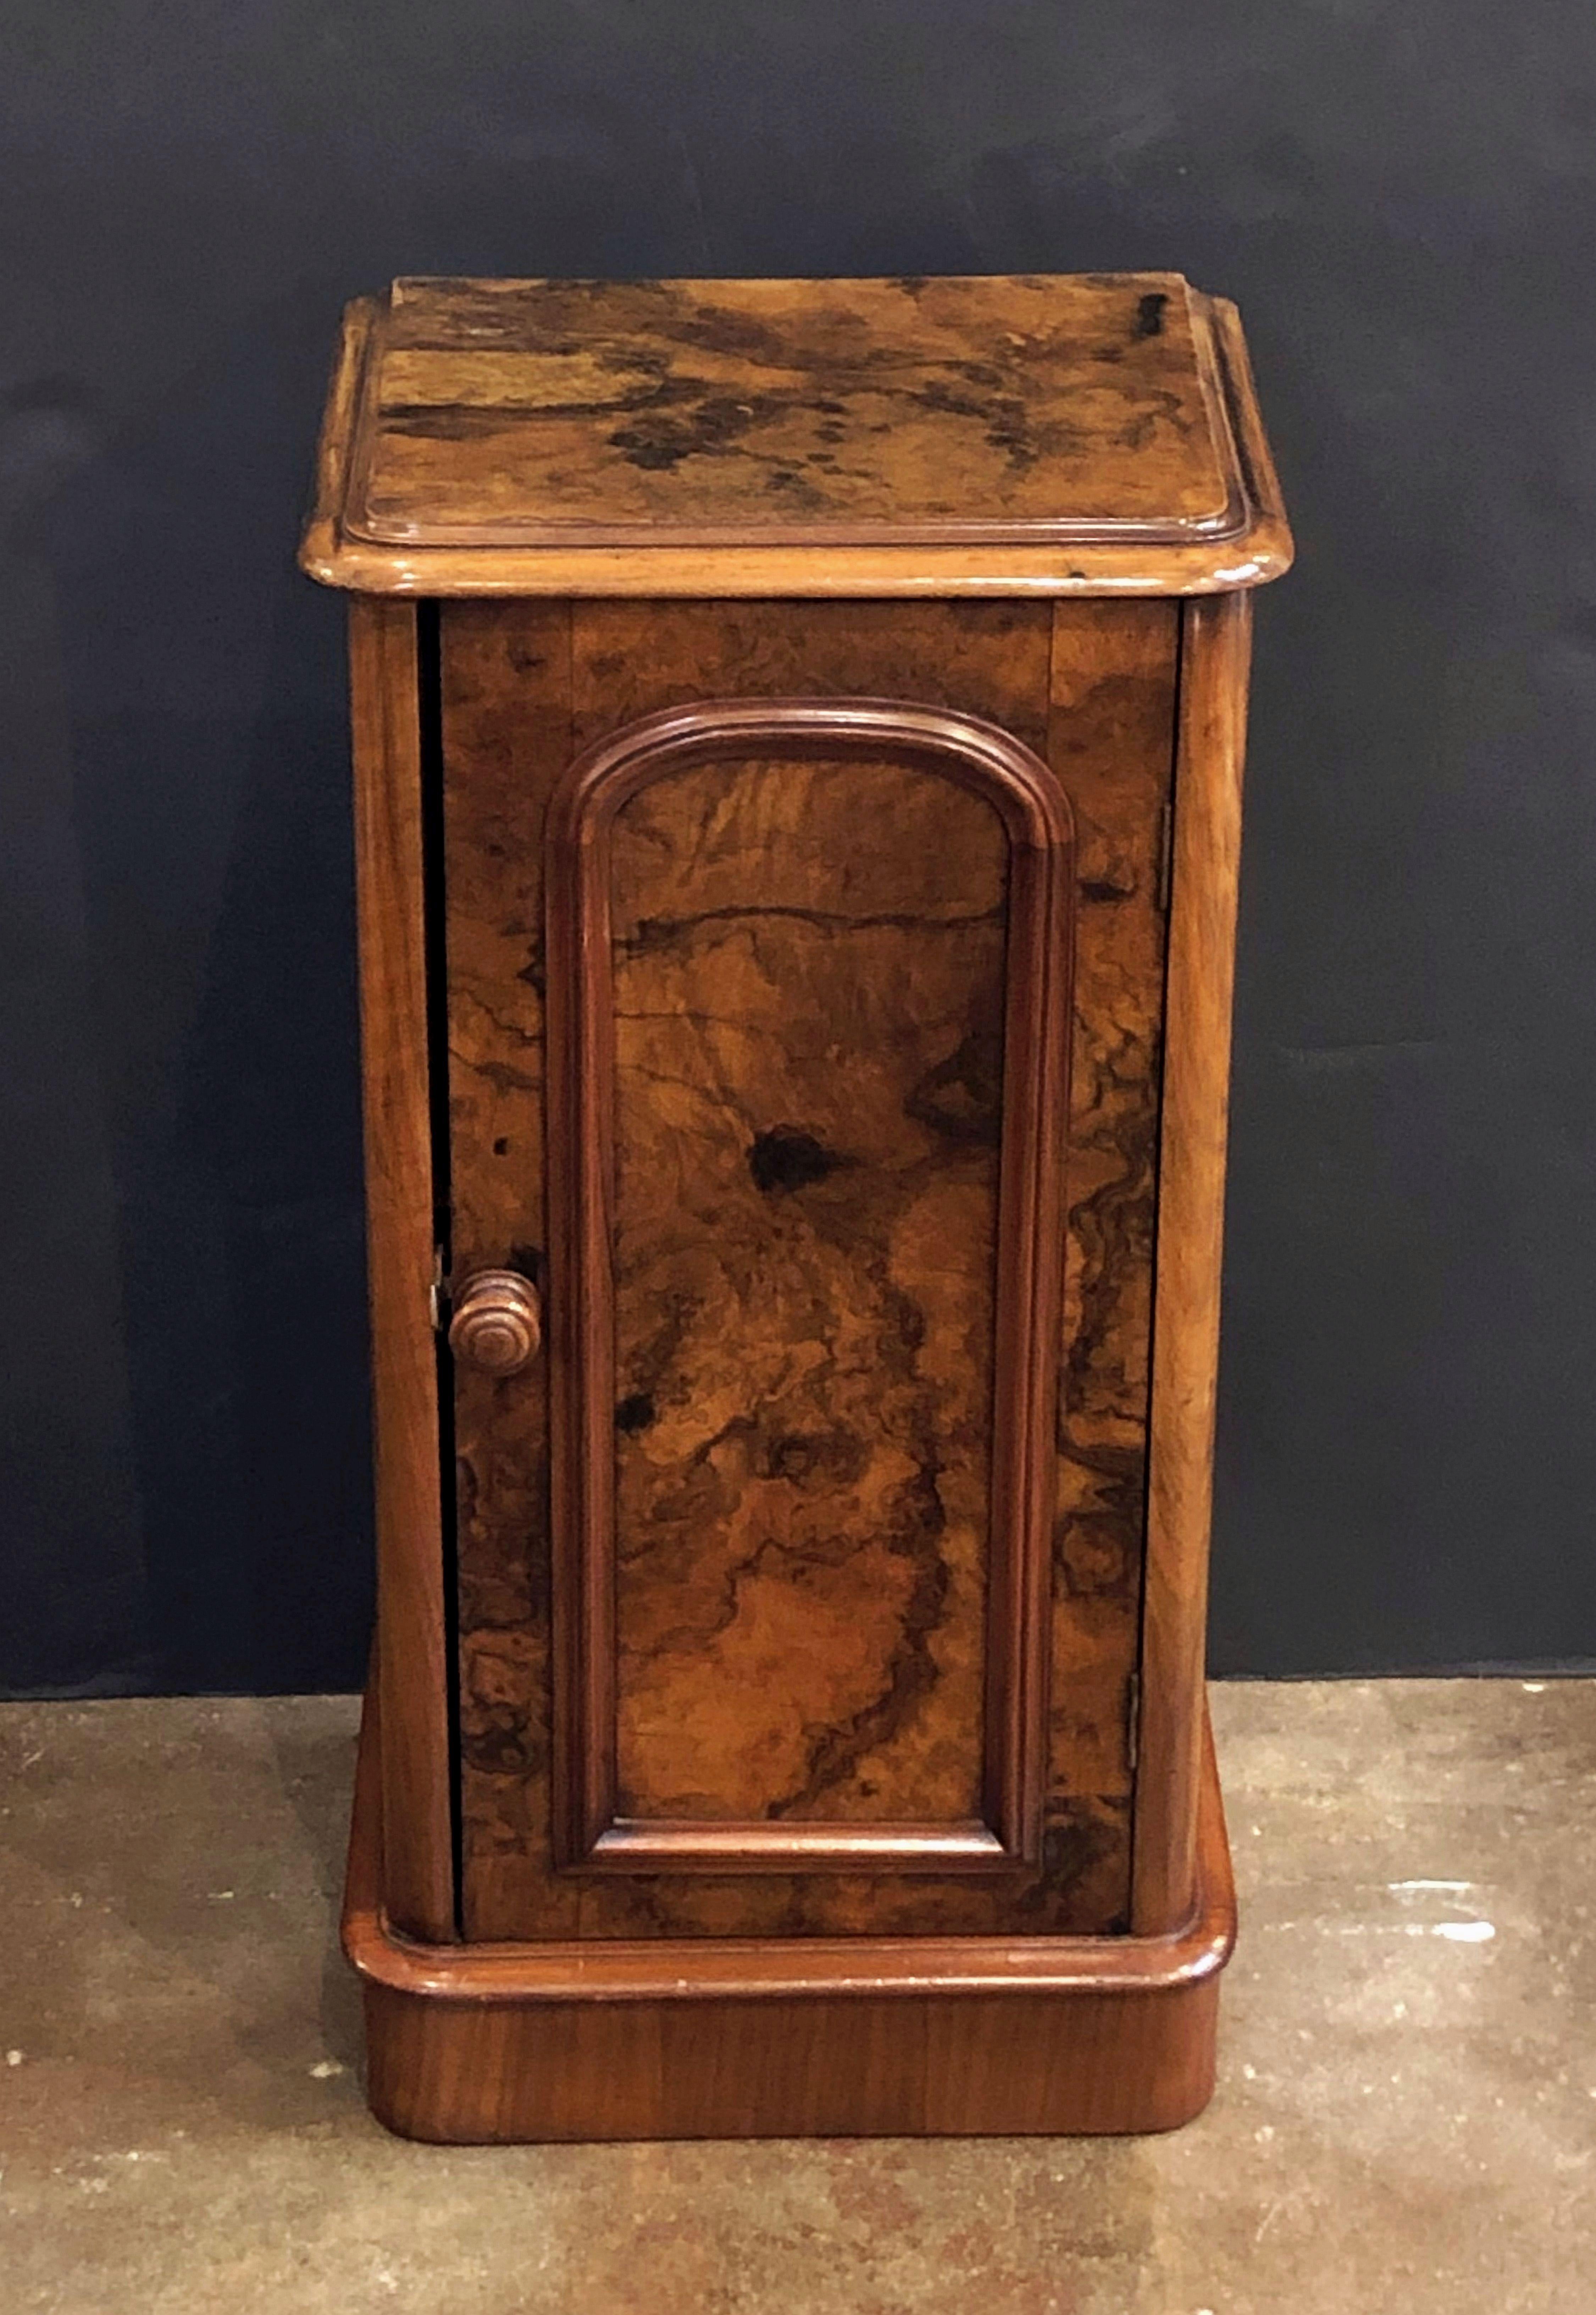 A handsome French nightstand or end (side) table of burr walnut, with moulded top over a cabinet door, opening to interior with shelf, and resting on a moulded plinth.

Dimensions: H 29 1/2 inches x W 15 1/2 inches x D 12 1/2 inches.

 